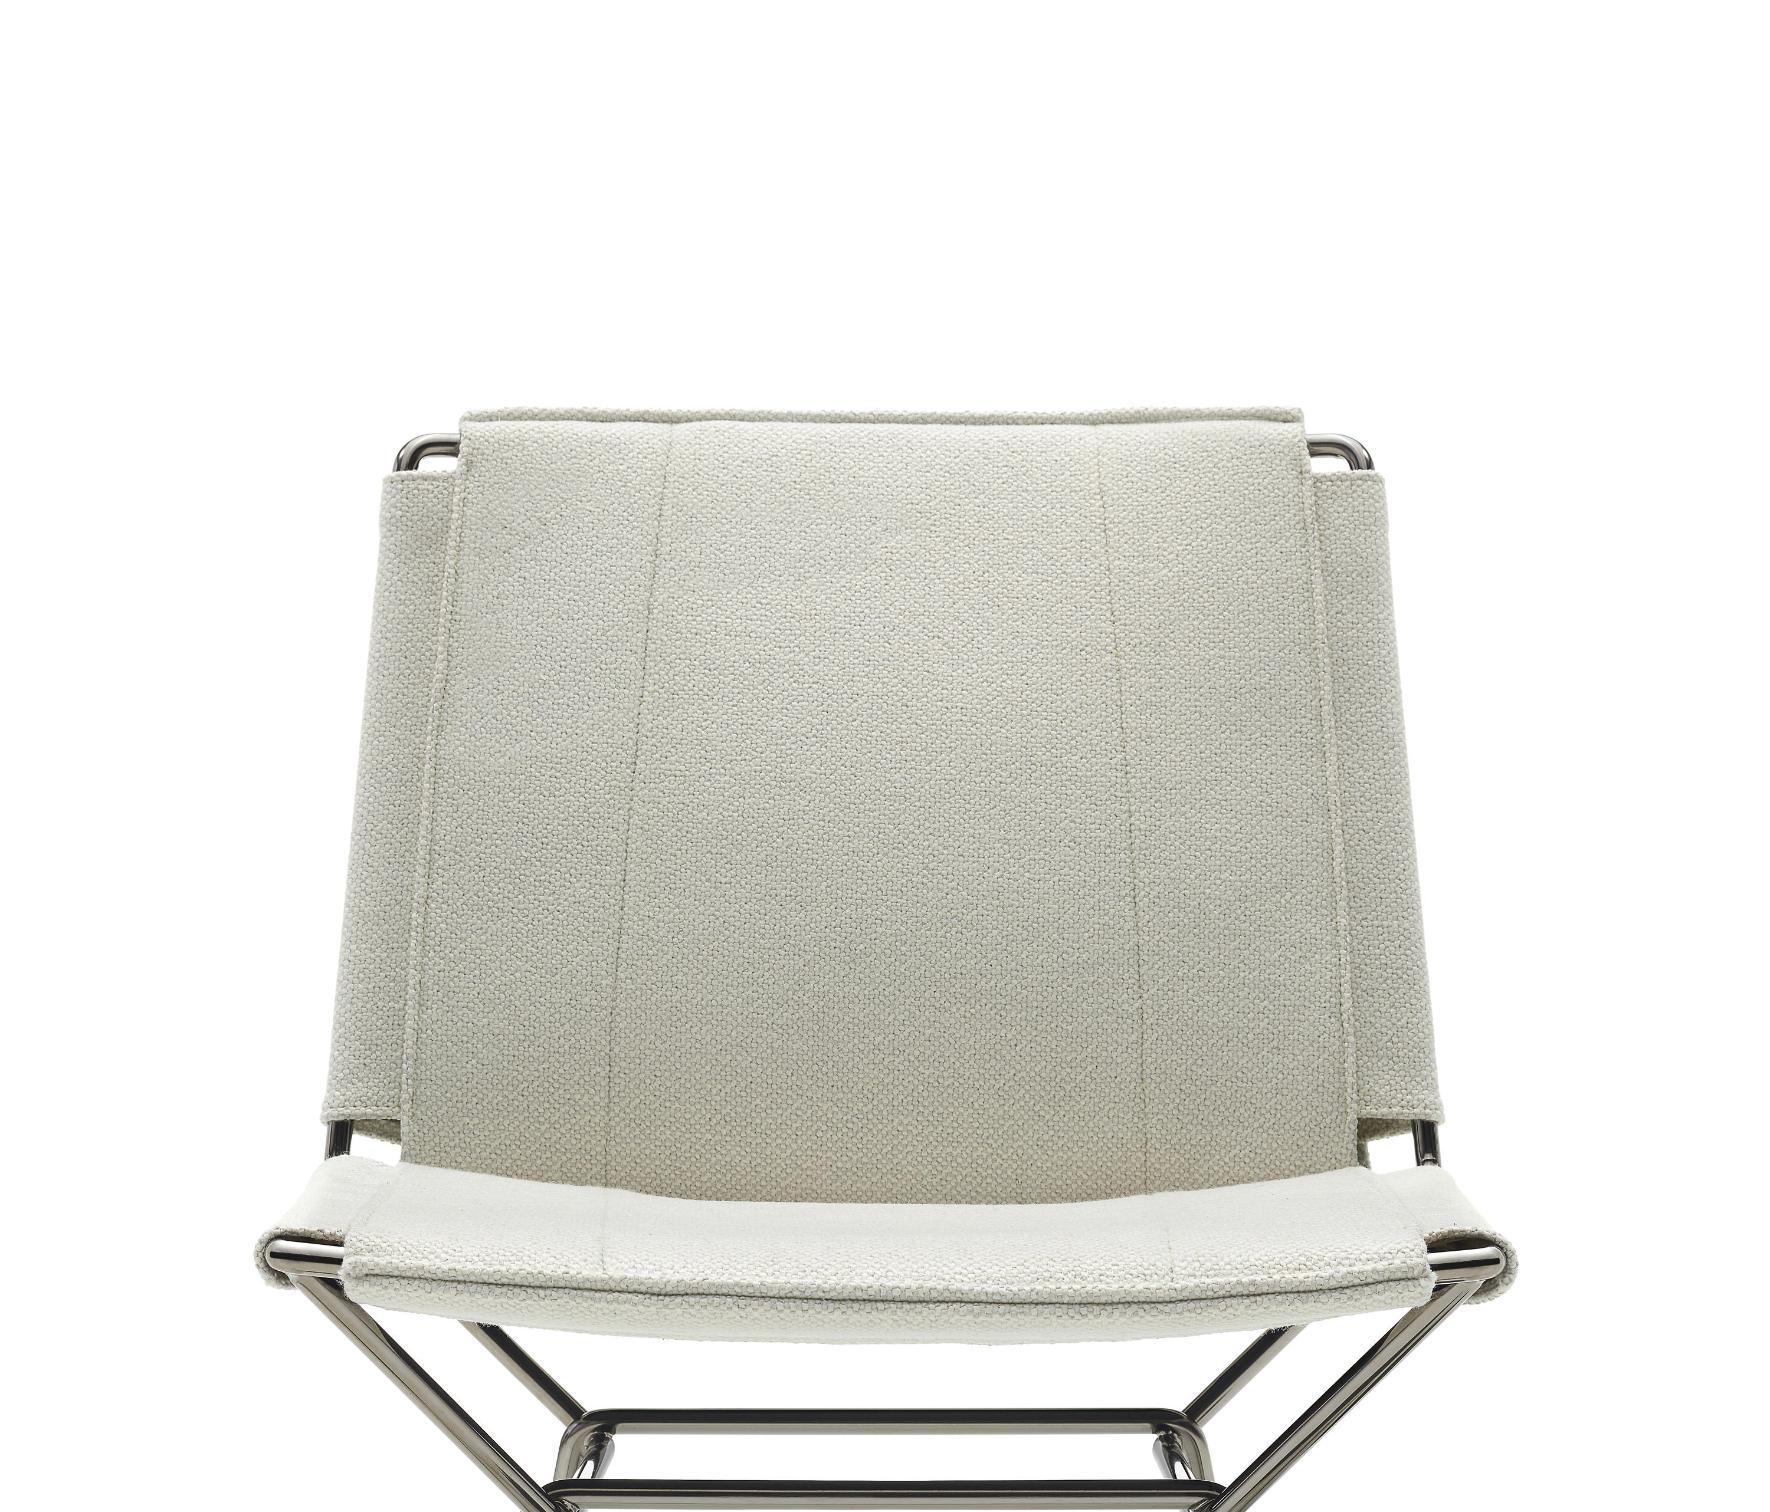 Neil Elegance Textile Stool ☞ Color: White R443 Col. 005 ☞ Dimensions: Height 107 cm